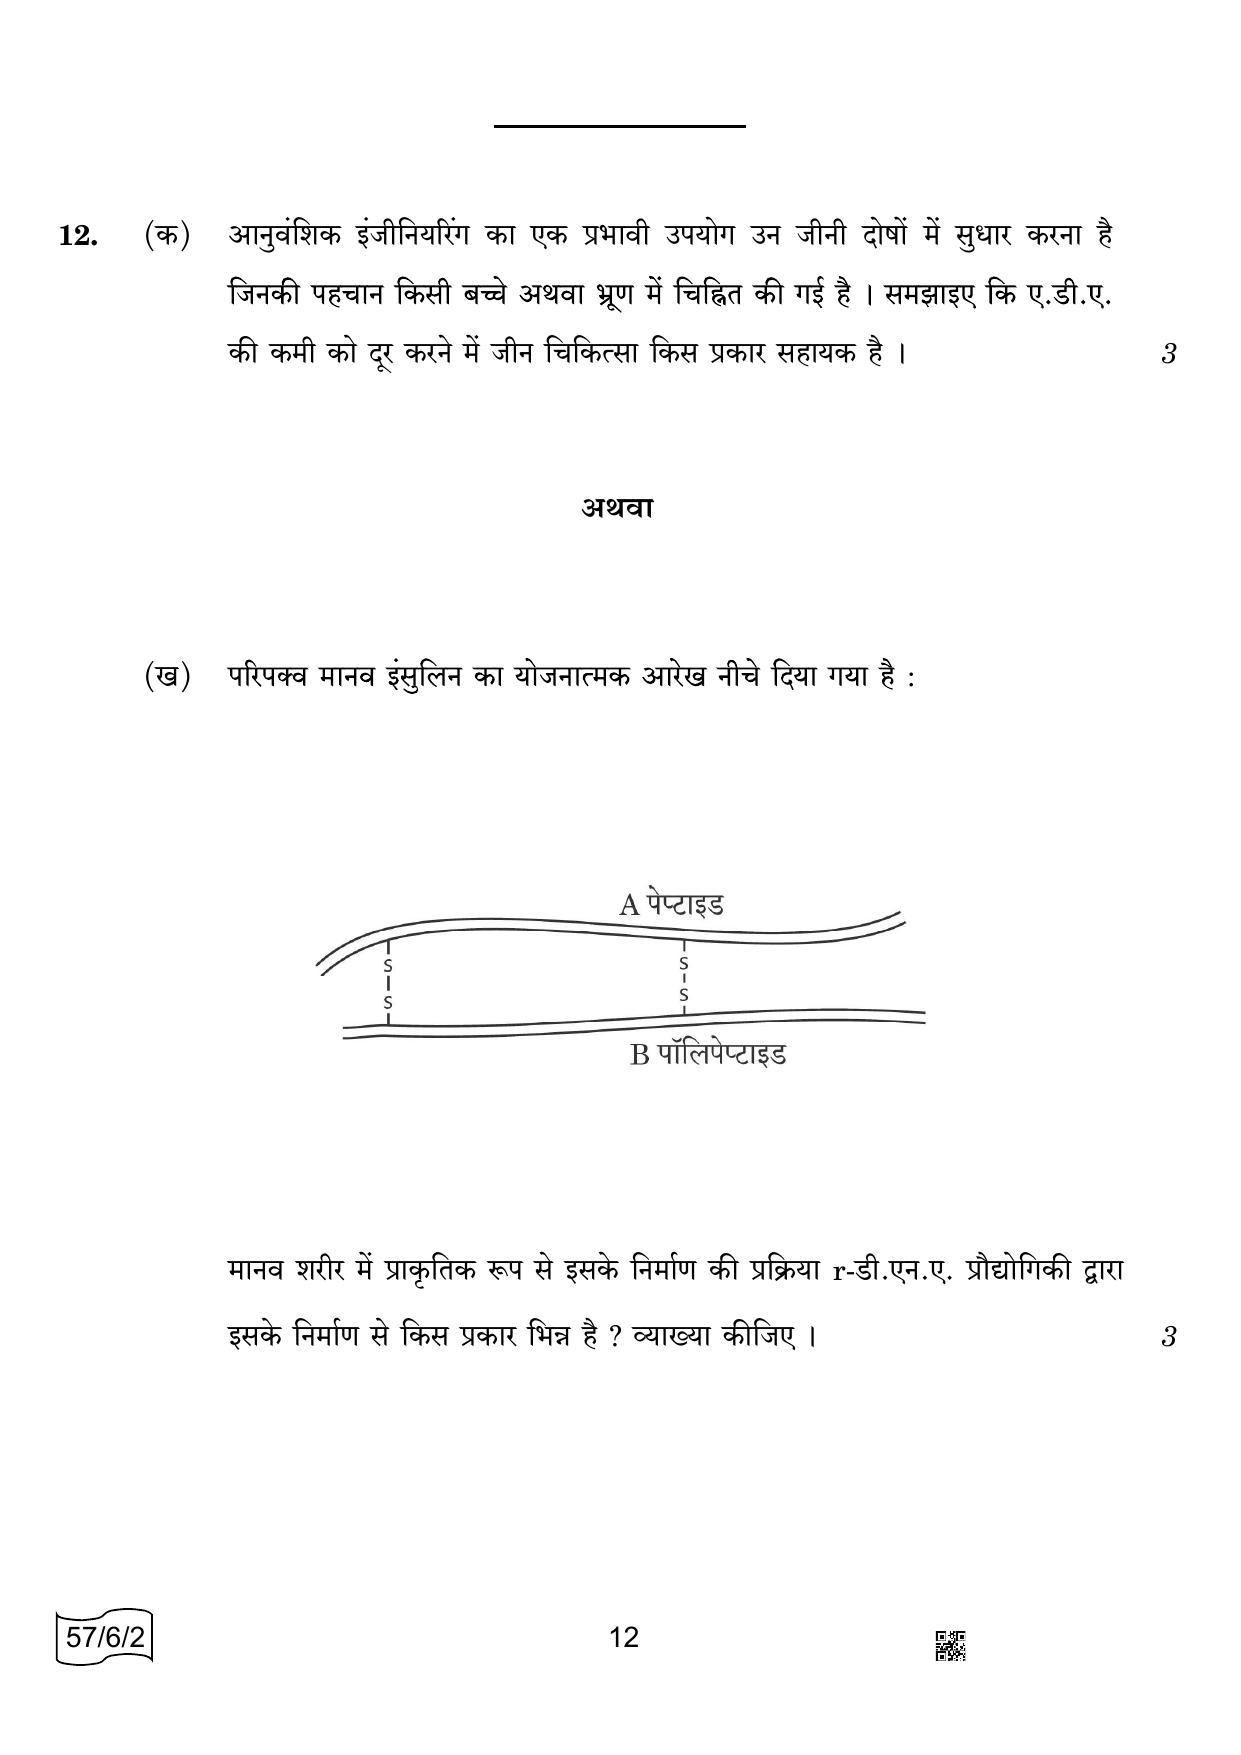 CBSE Class 12 57-6-2 BIOLOGY 2022 Compartment Question Paper - Page 12